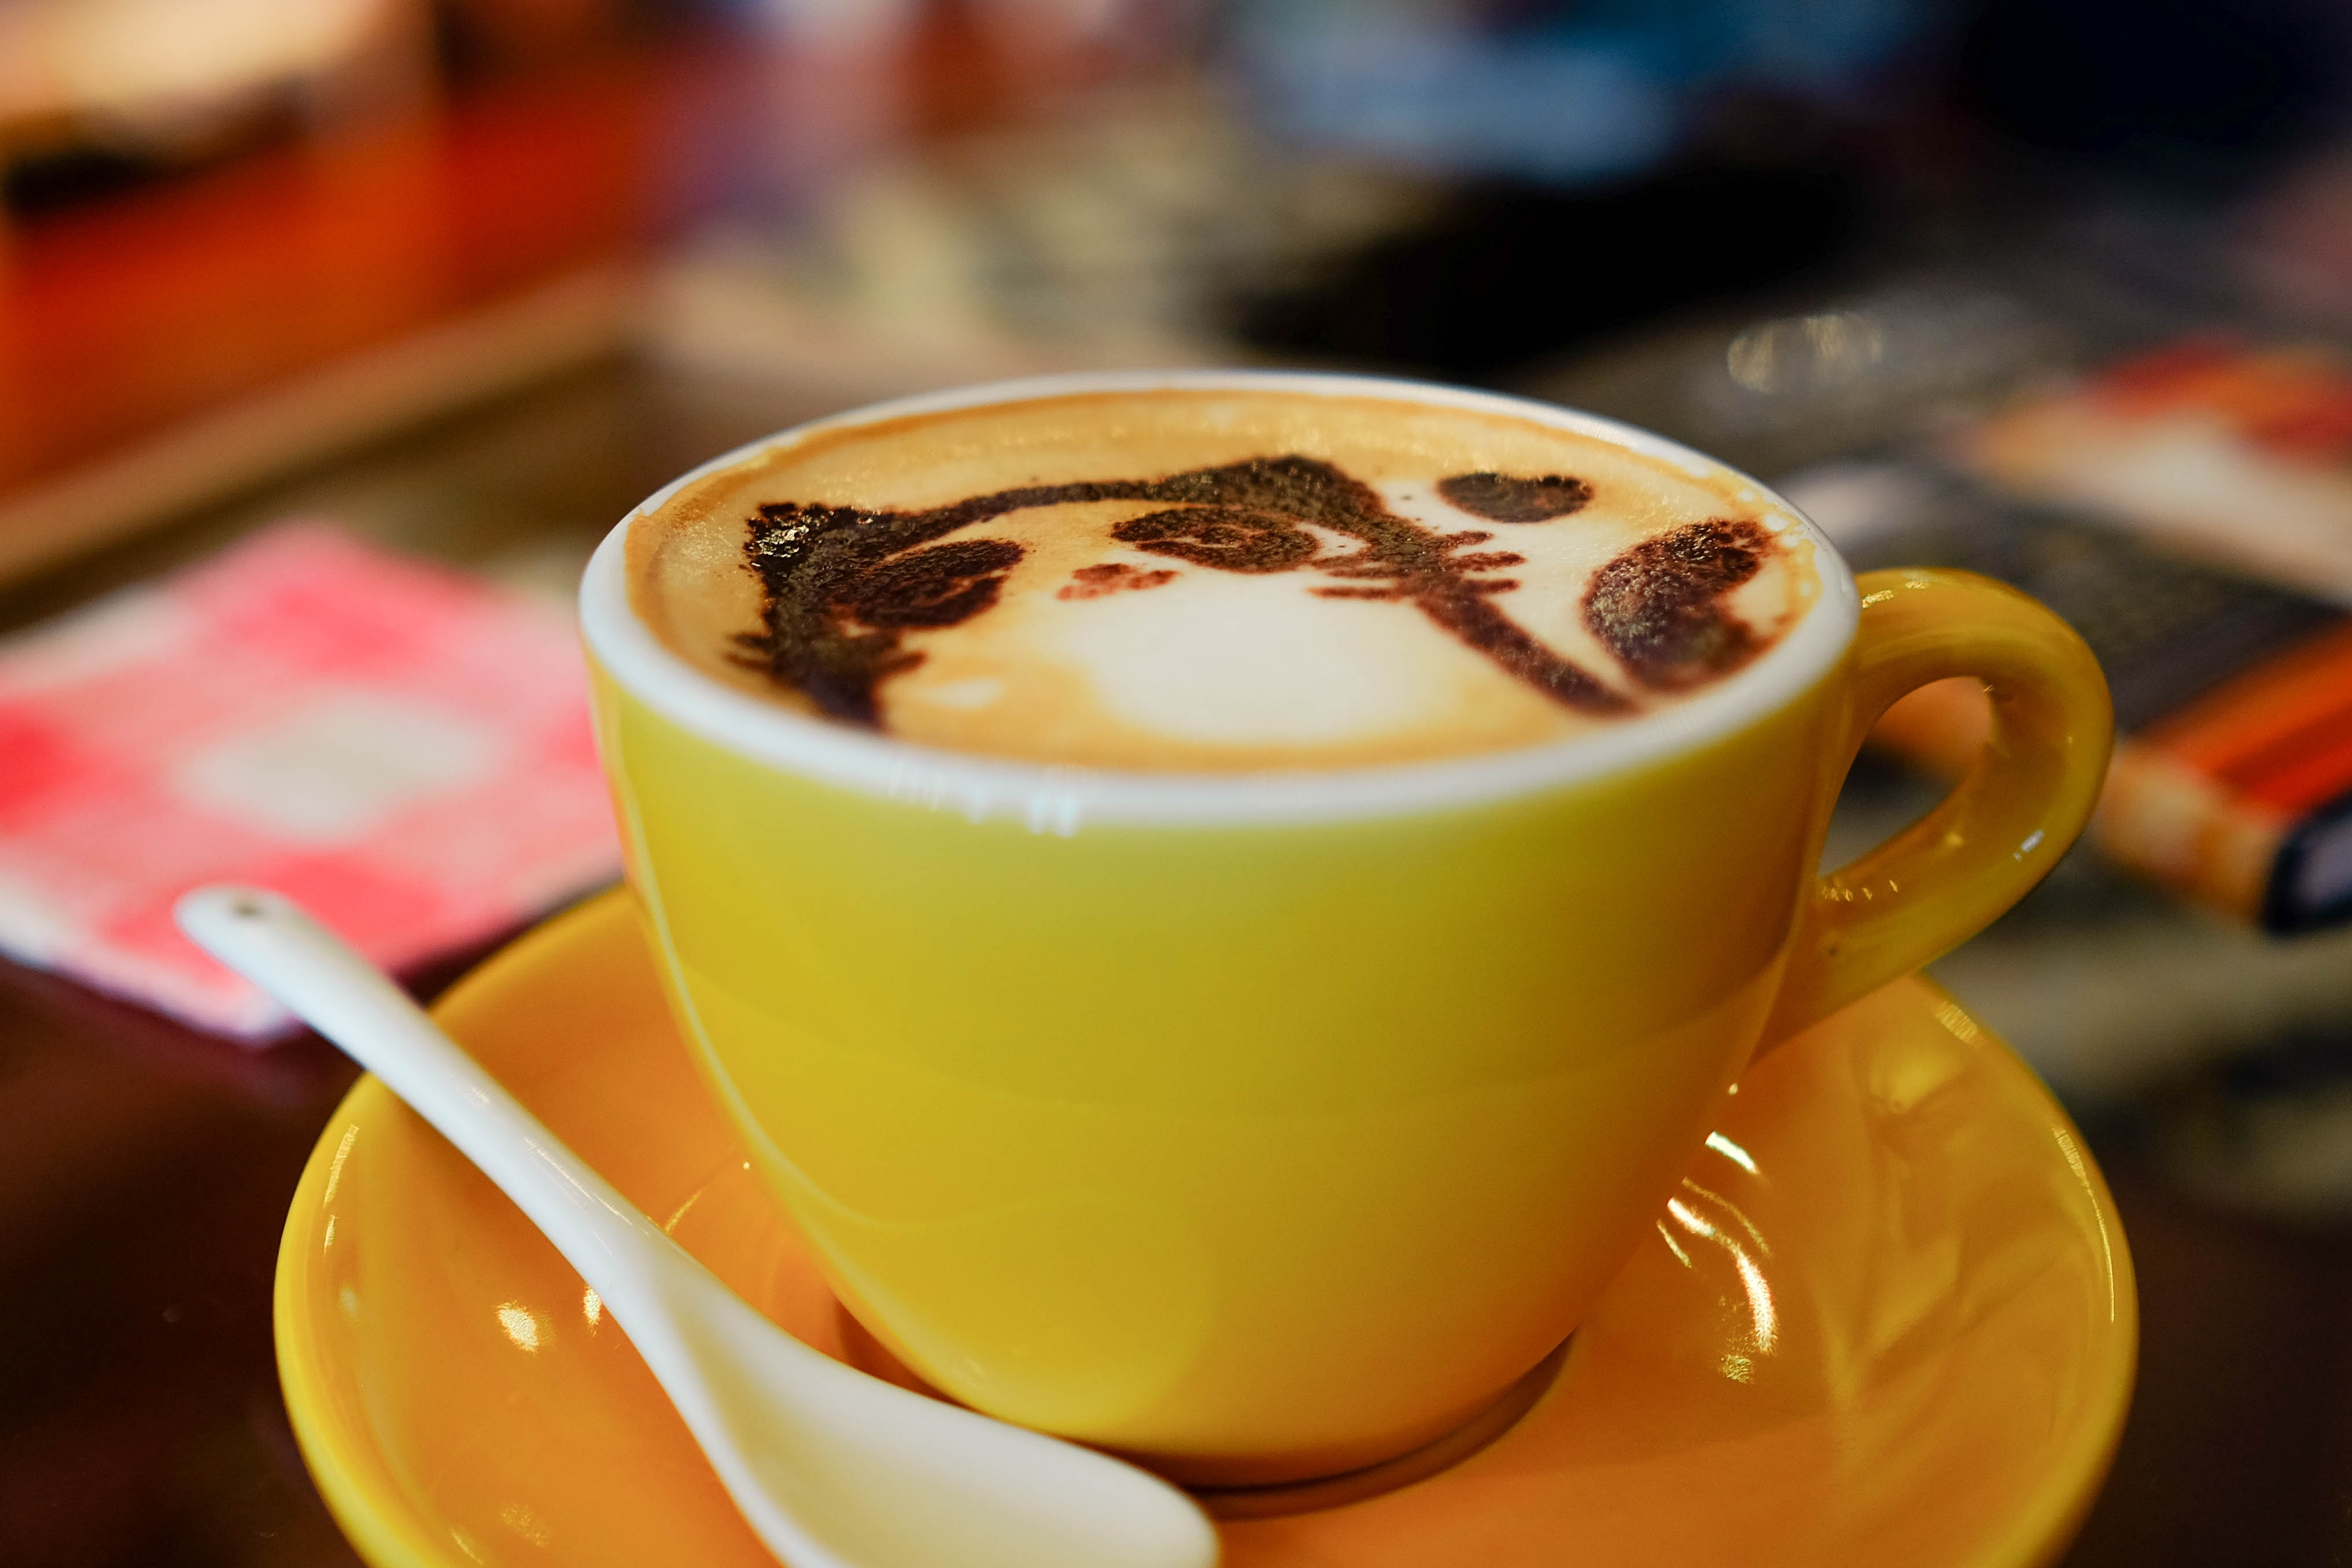 cat foam art latte on brown ceramic cup on saucer and white teaspoon